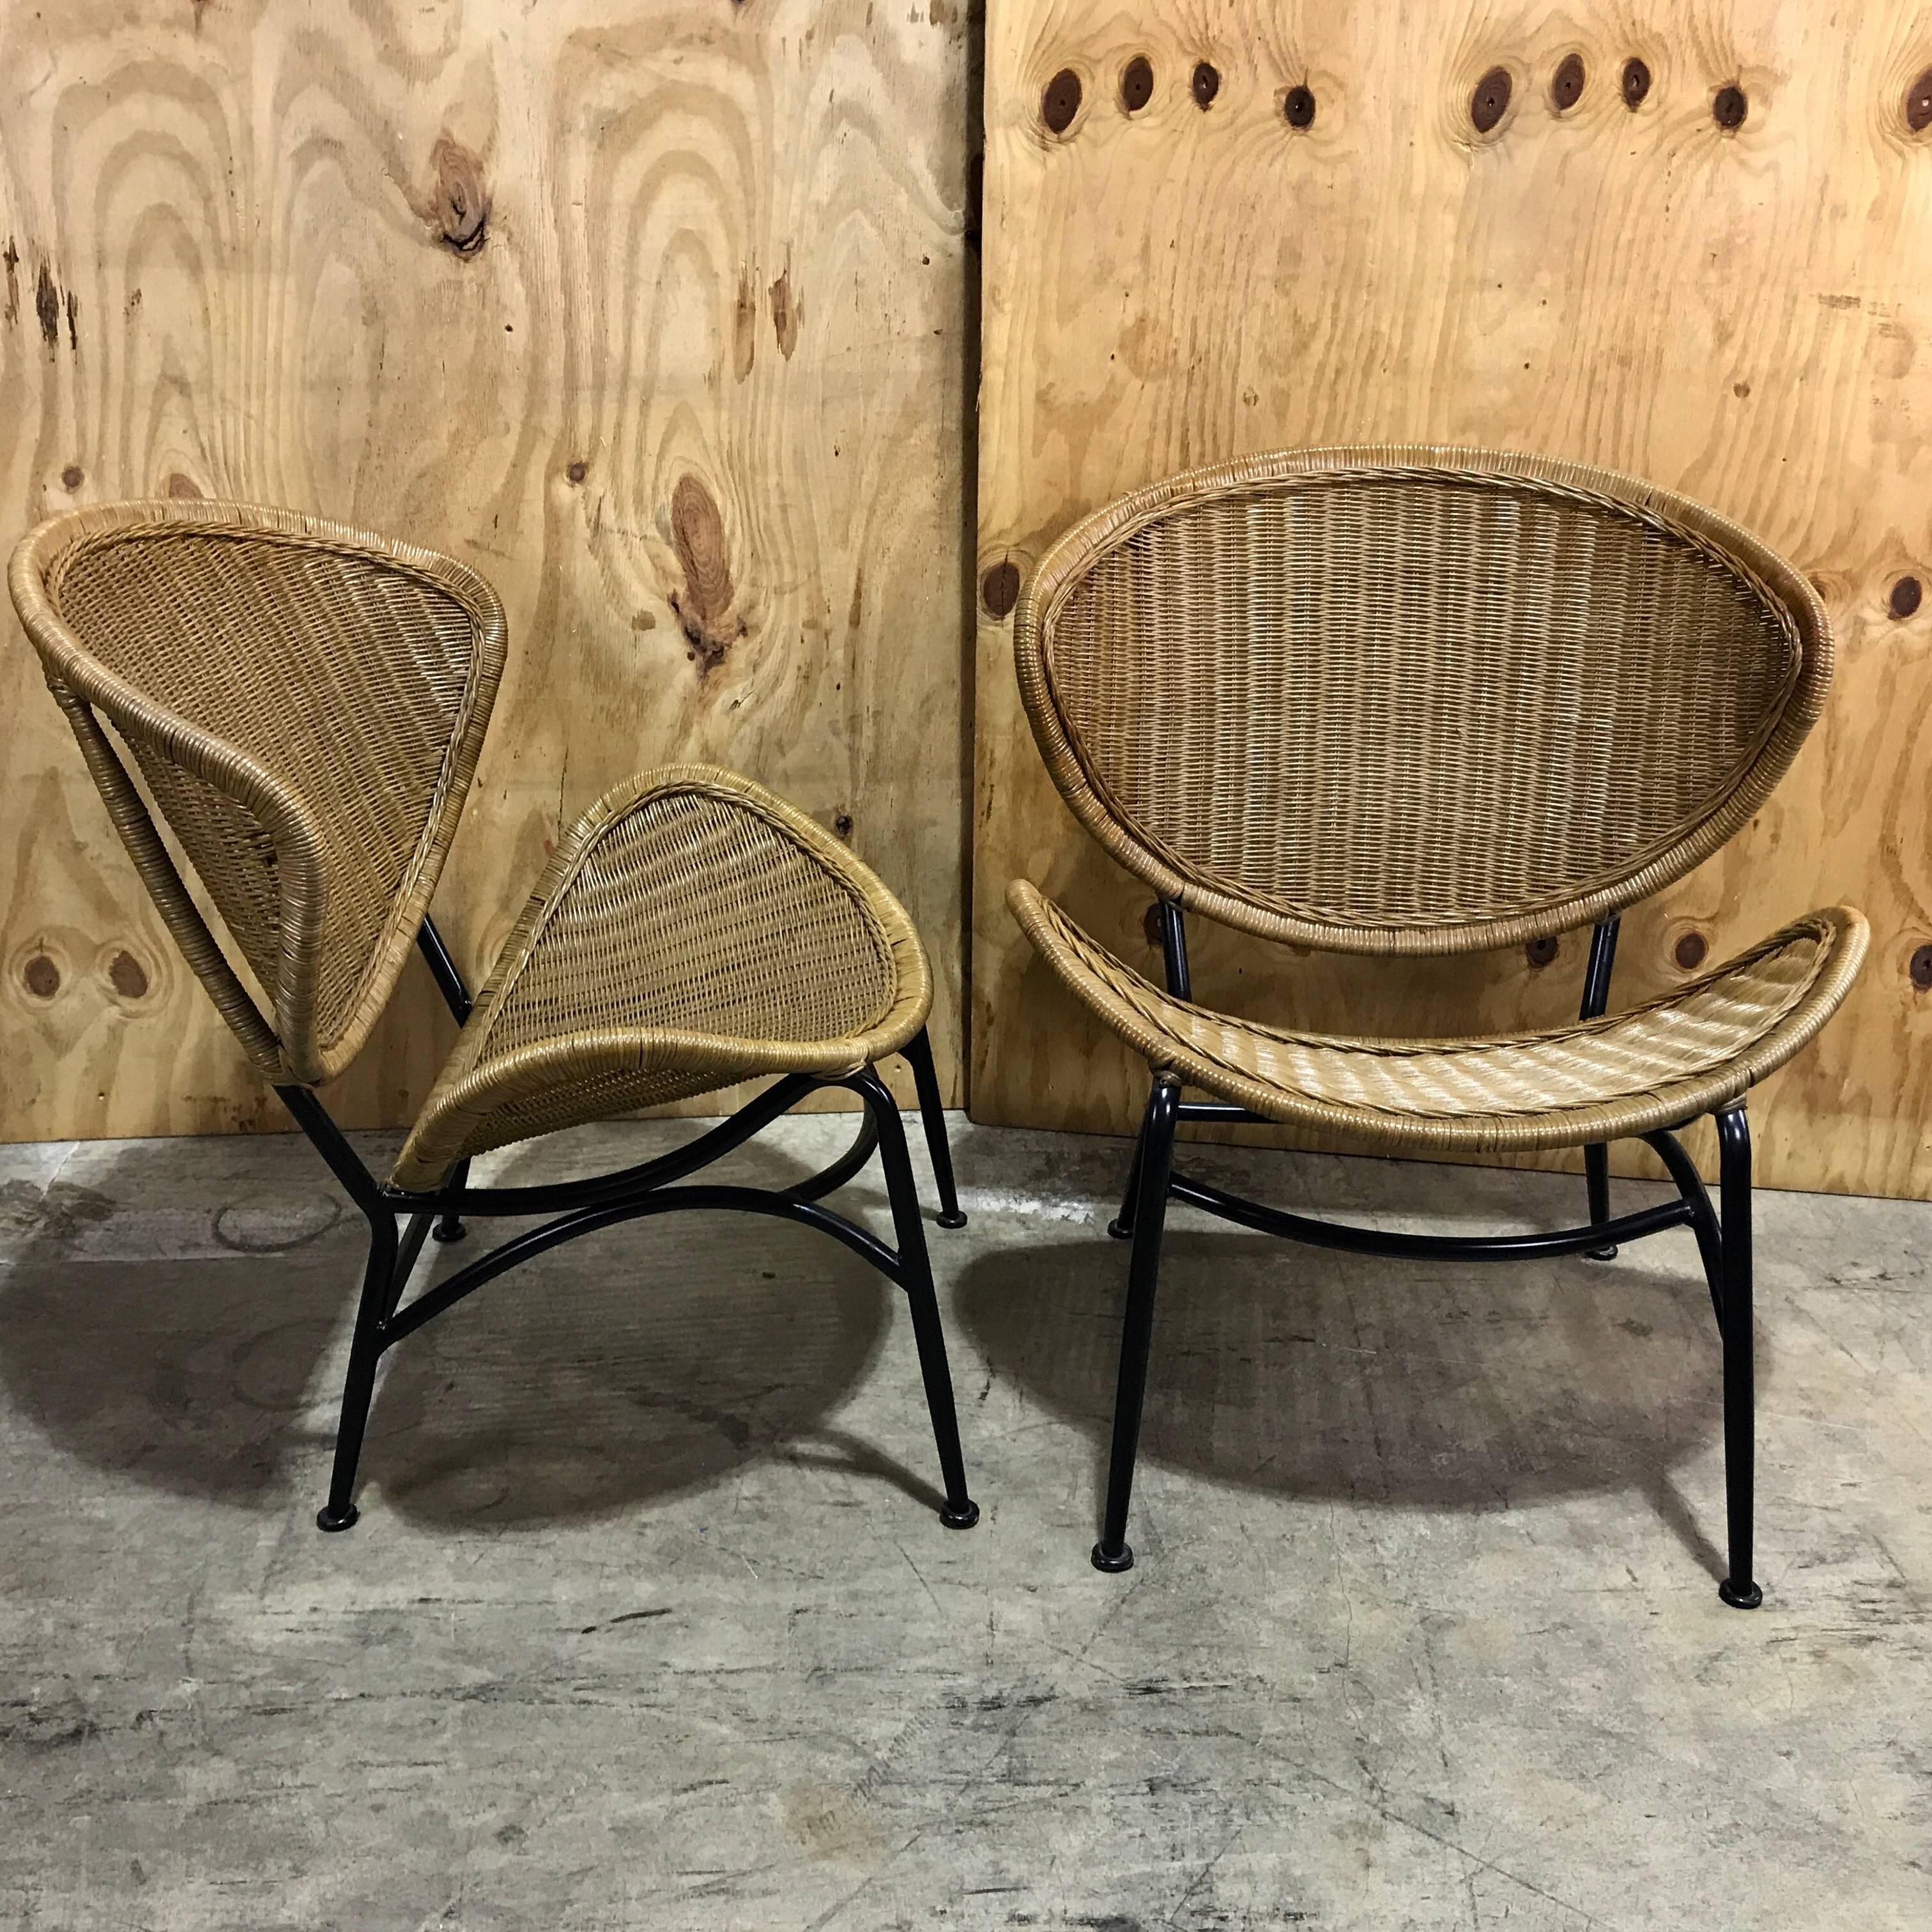 Pair of midcentury crescent shaped wicker lounge chairs, restored.